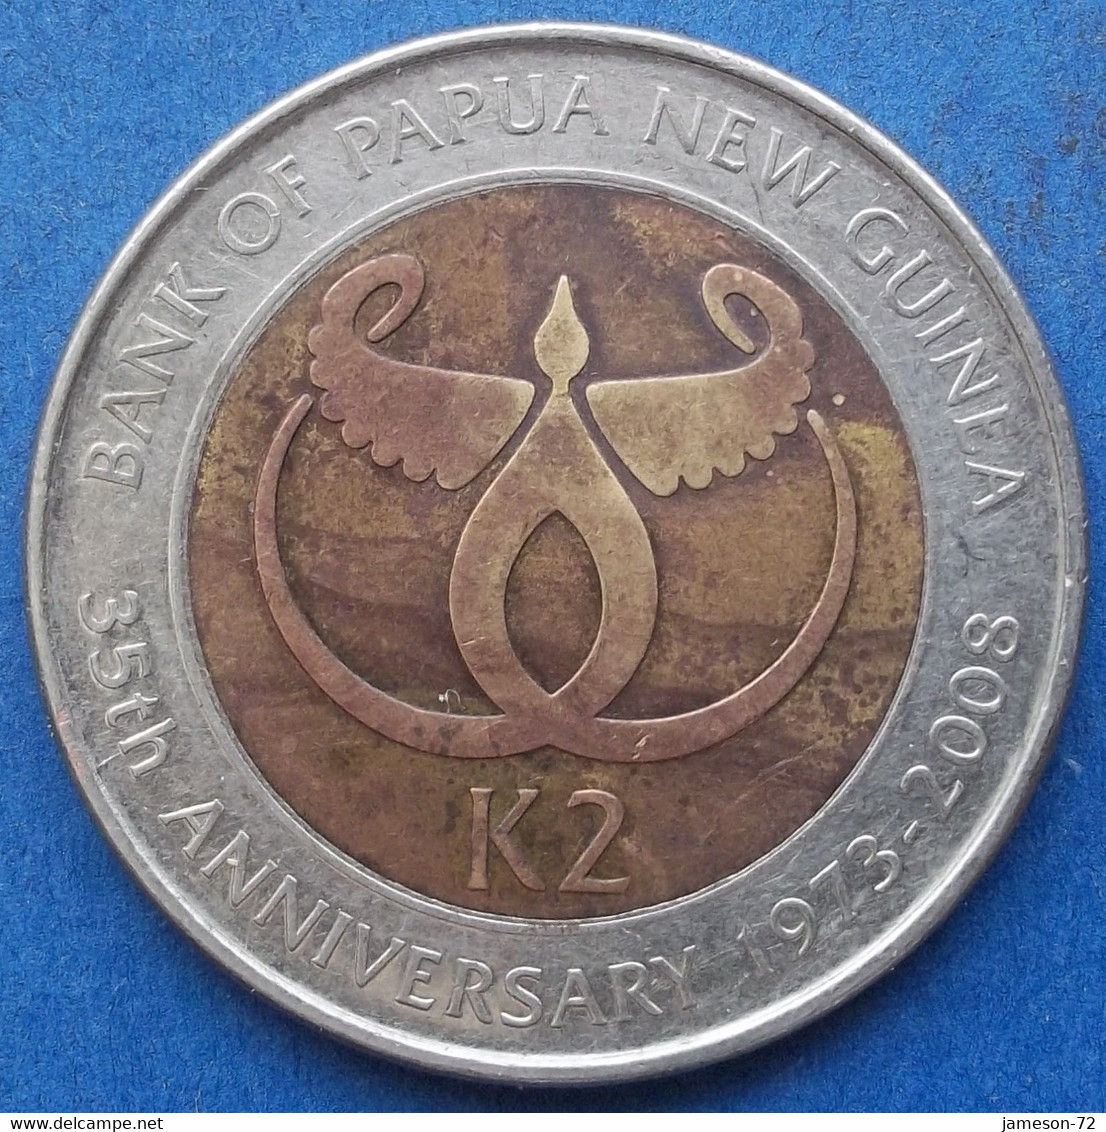 PAPUA NEW GUINEA - 2 Kina 2008 KM# 51 Independent (1975) - Edelweiss Coins - Papua New Guinea